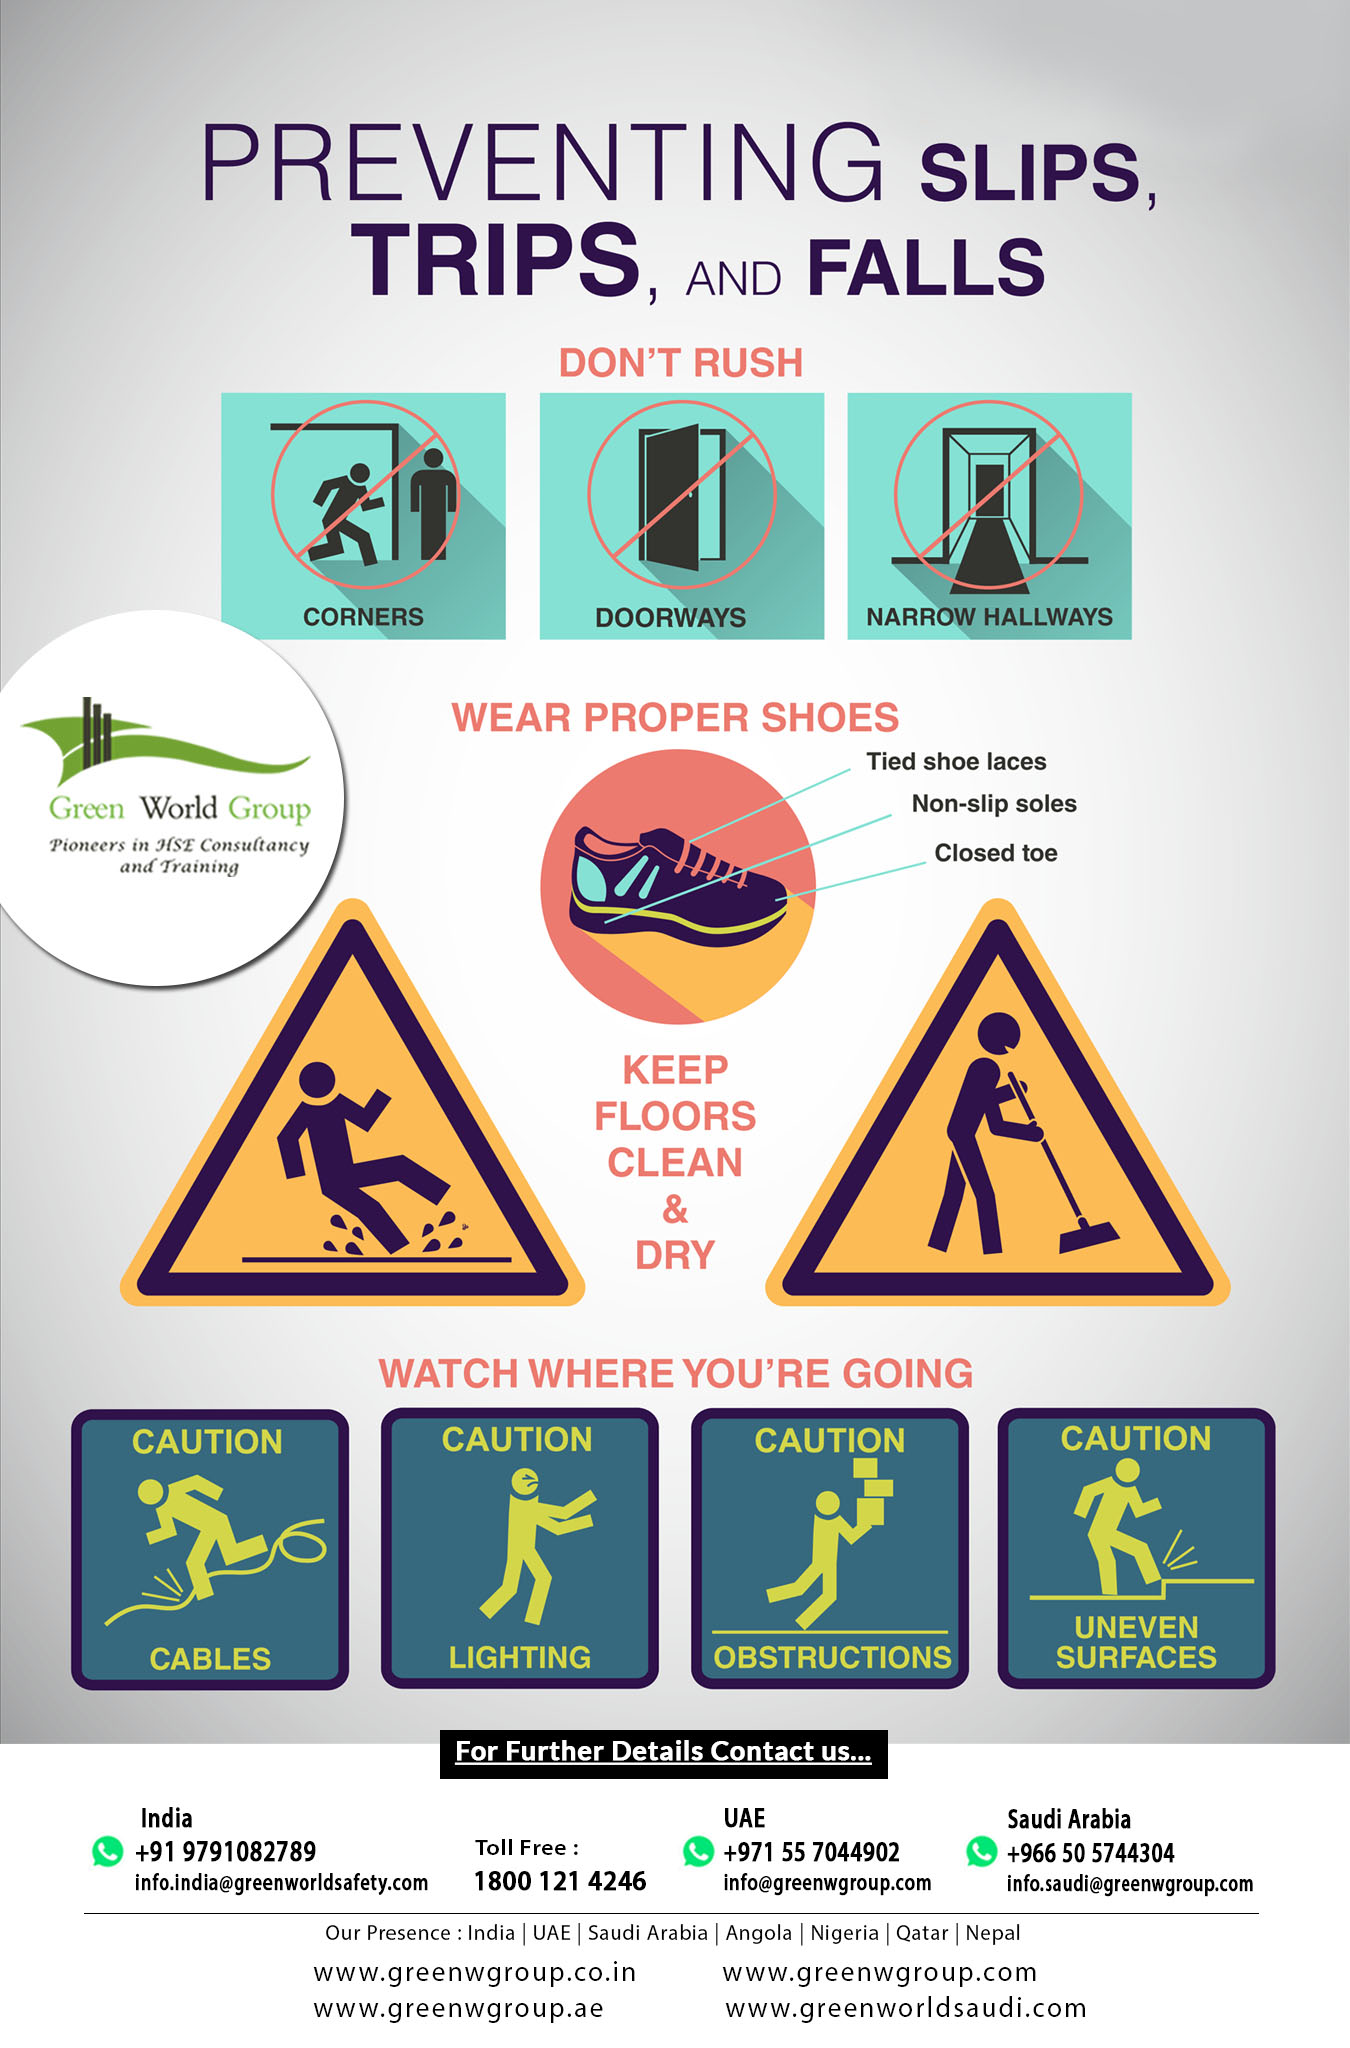 slips trips and falls powerpoint